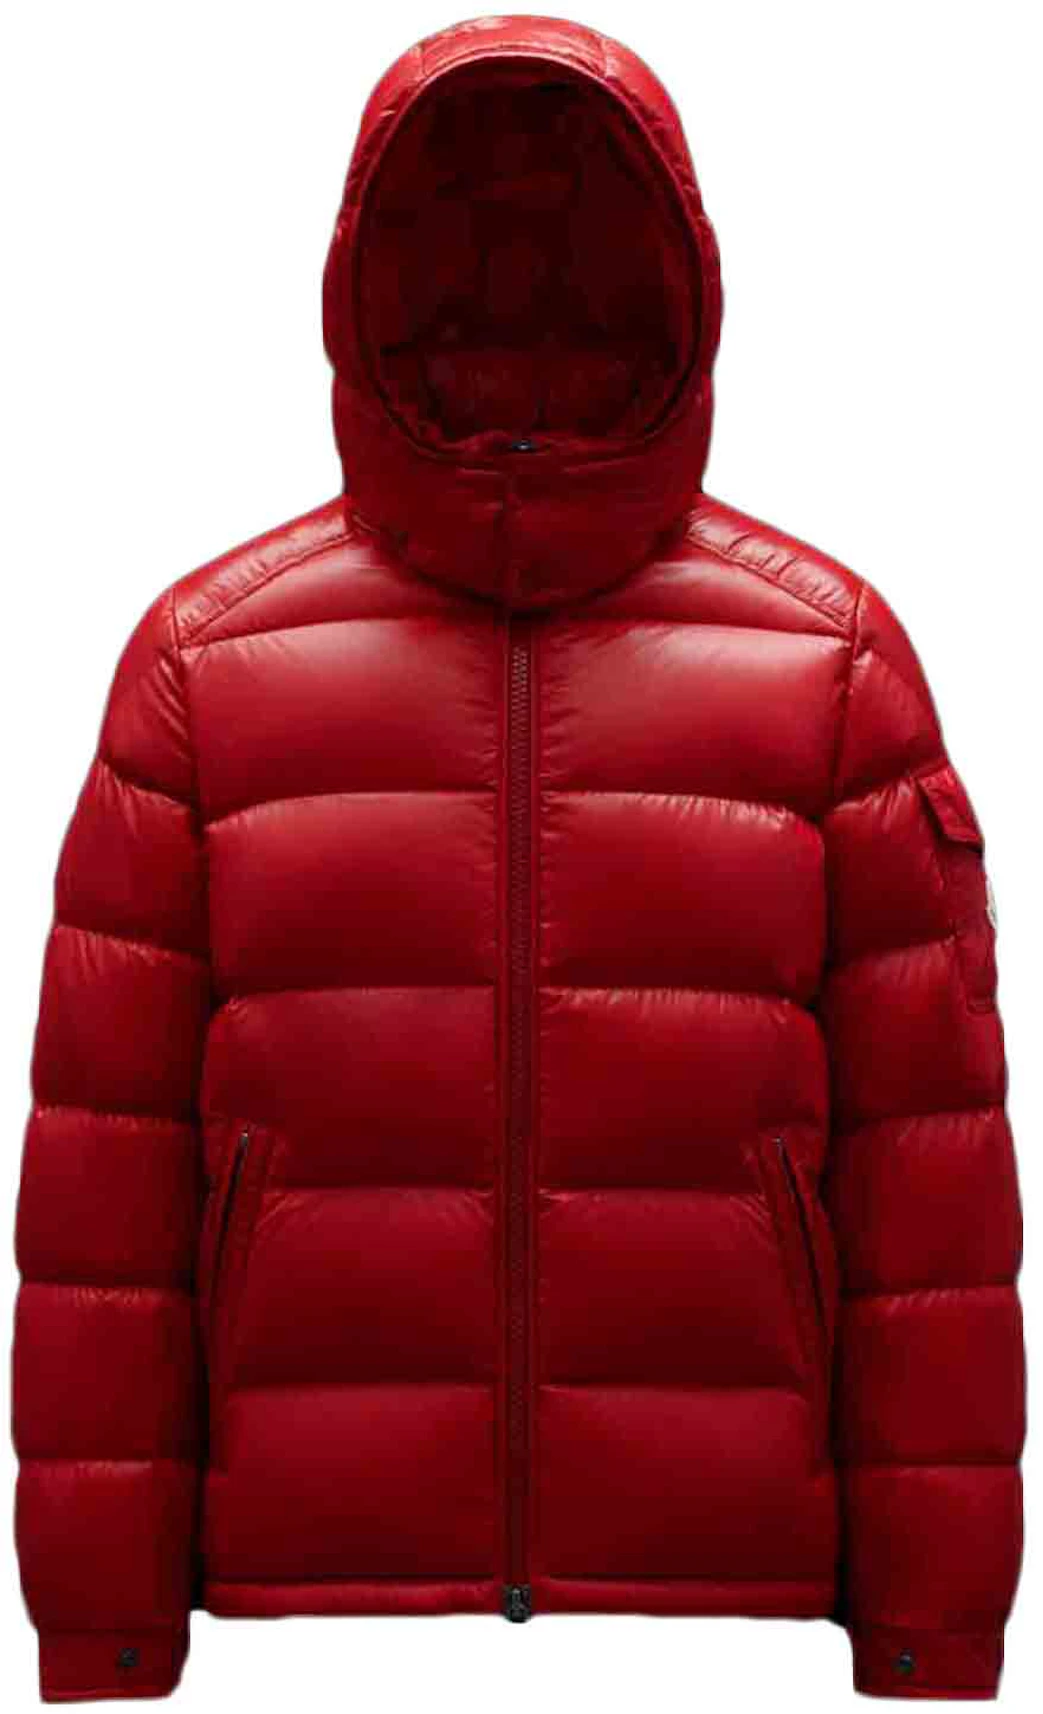 convince Moncler X Givenchy Hooded Down Puffer Jacket solenoid brake